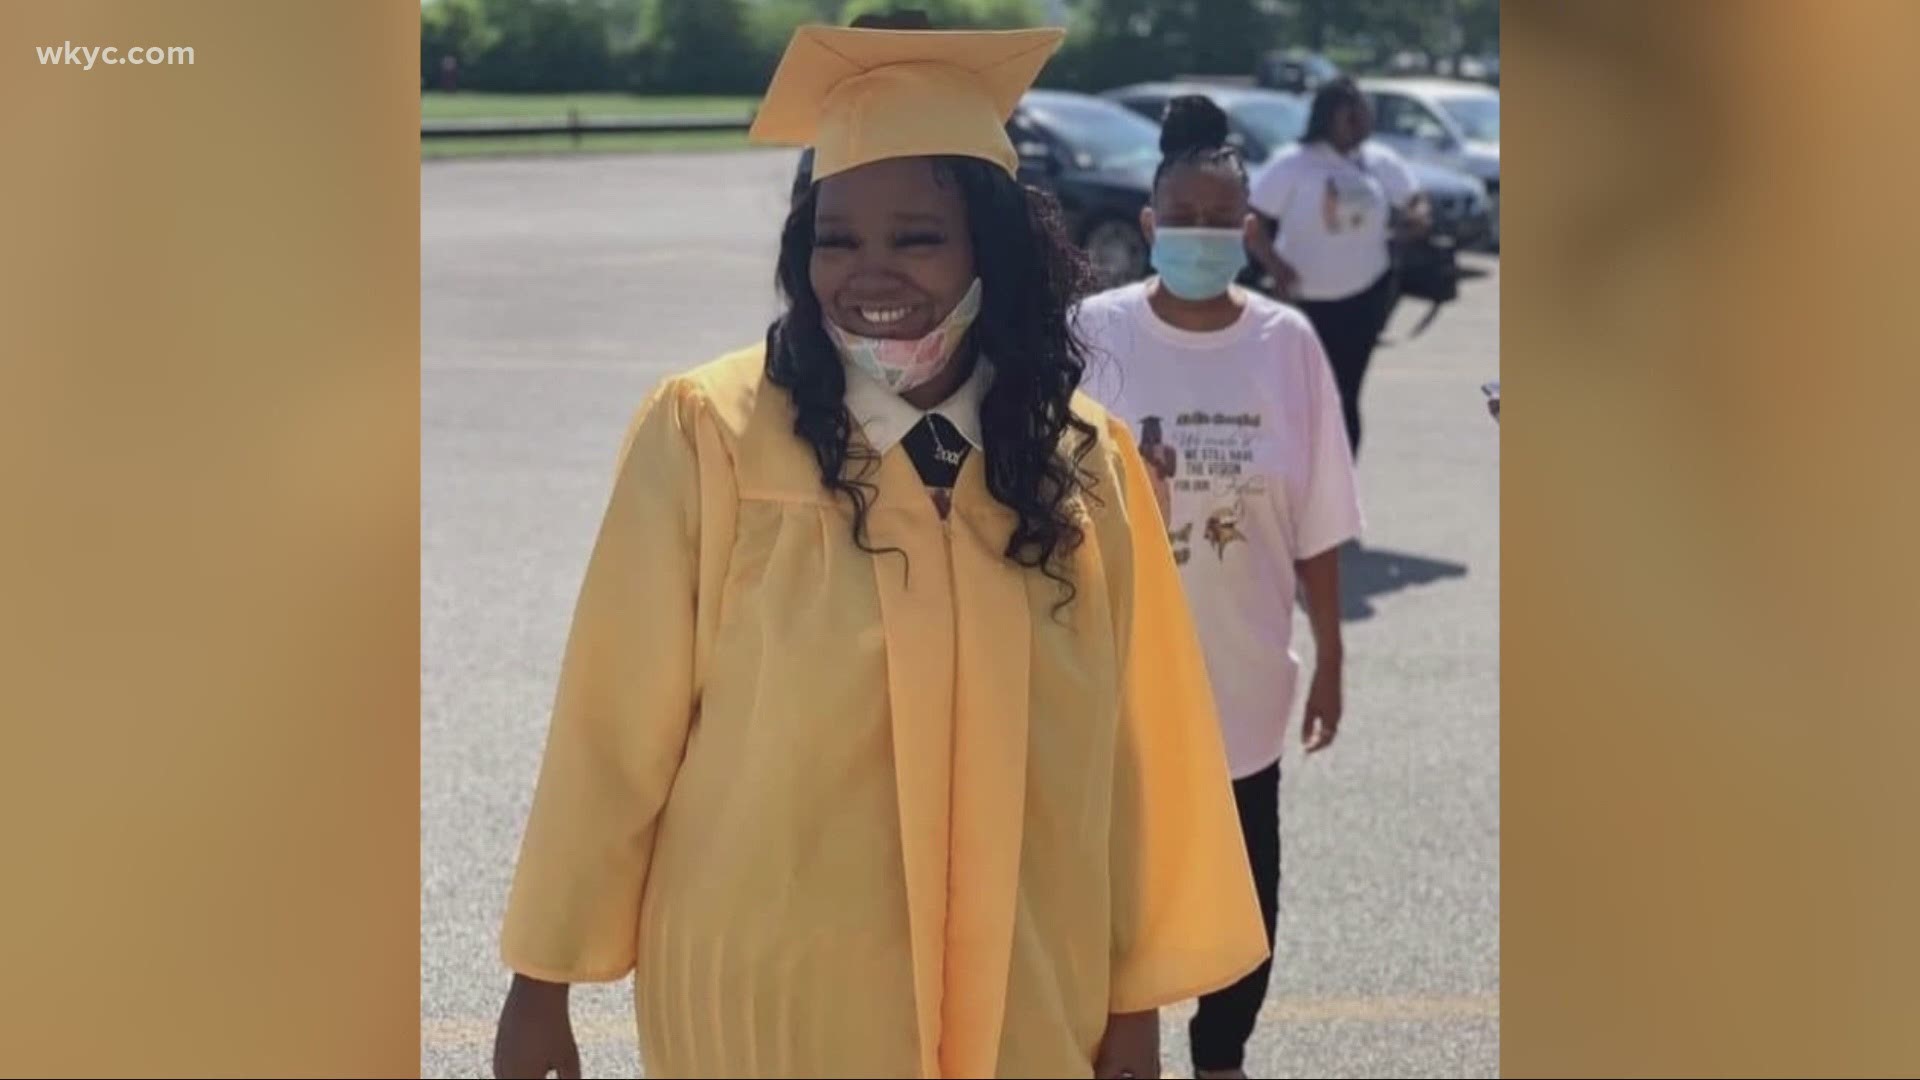 June 25, 2020: The Akron community will pay its final respects today as family and friends hold funeral services for 18-year-old Na’Kia Crawford.